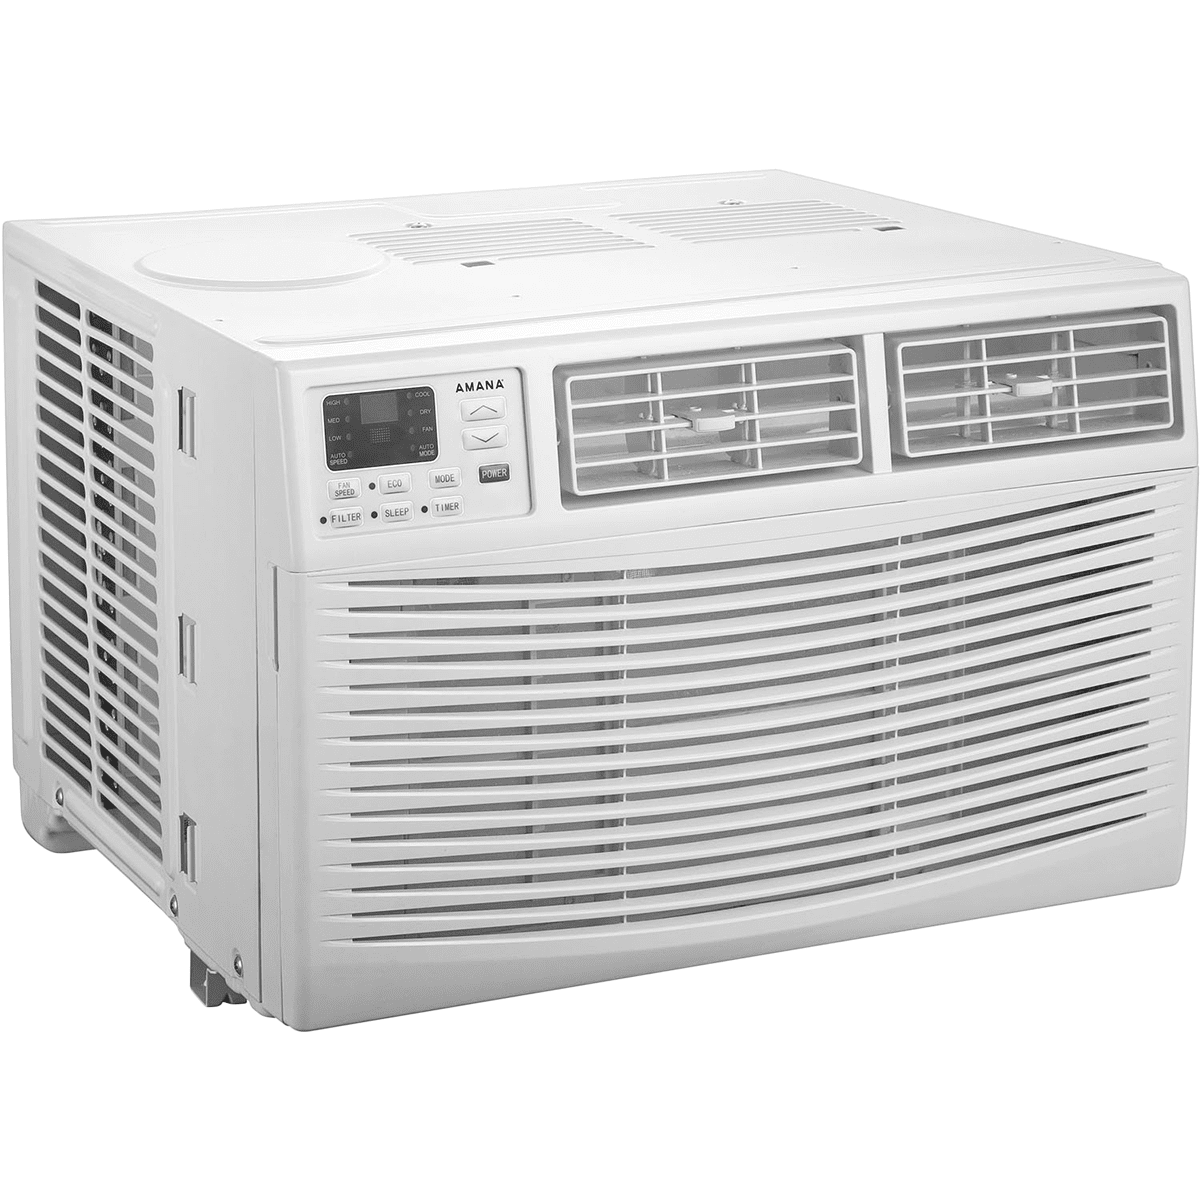 Amana 6,000 Btu Window Air Conditioner With Electronic Controls - Amap061bw